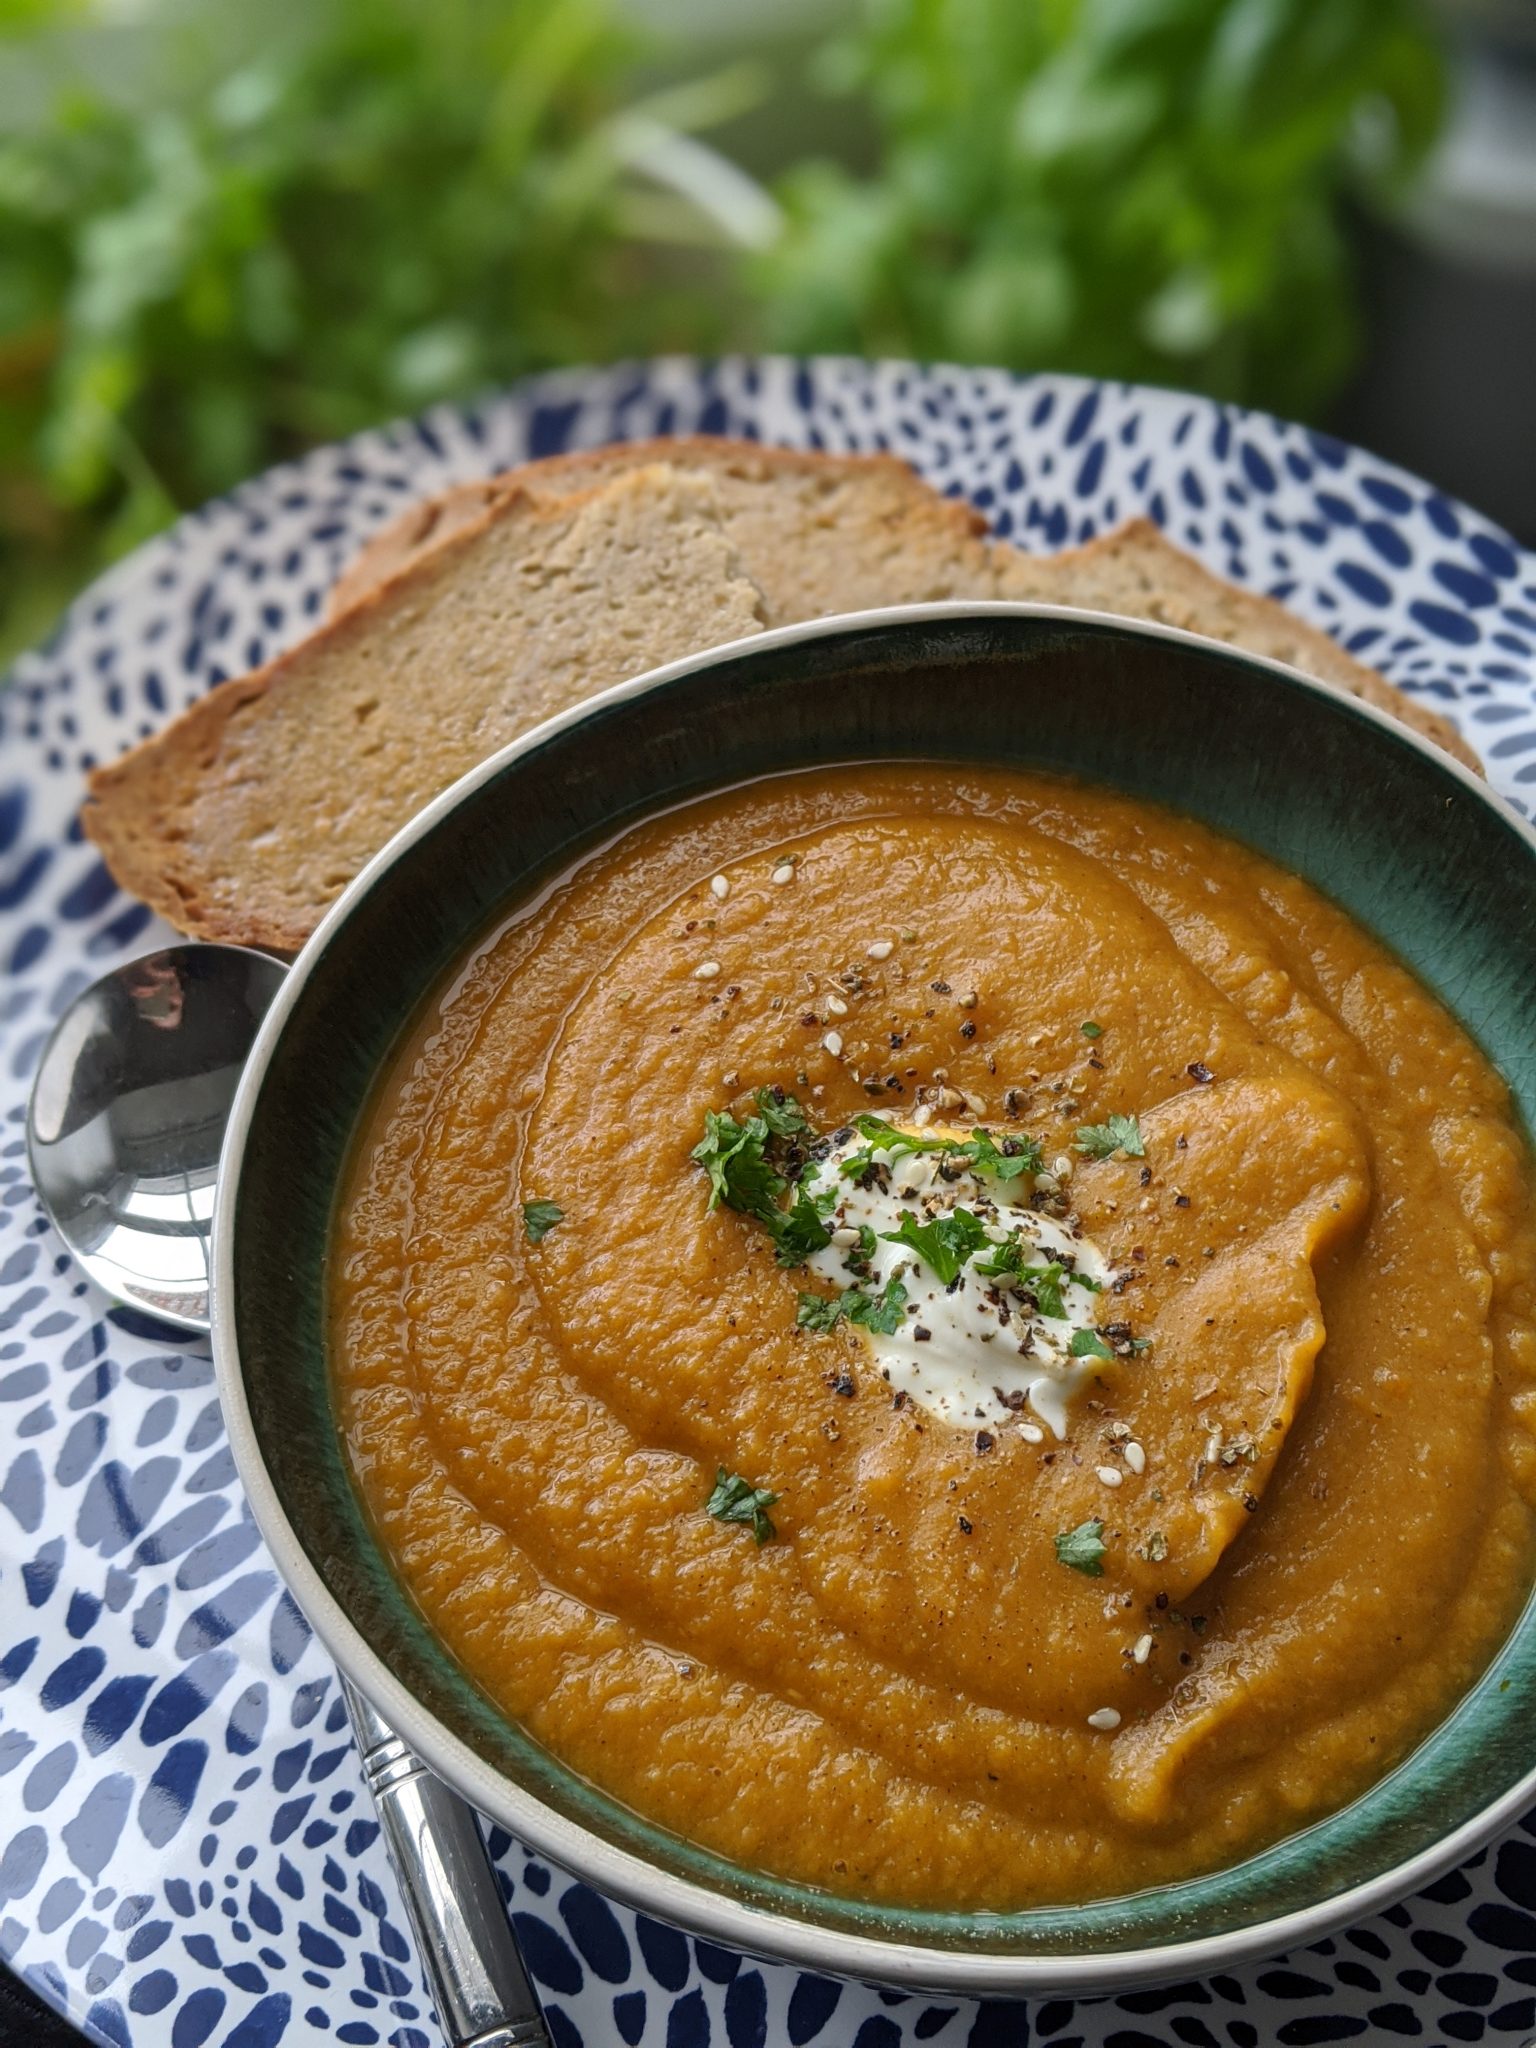 Curried Carrot, Sweet Potato and Lentil Gluten Free Soup - My GF Guide